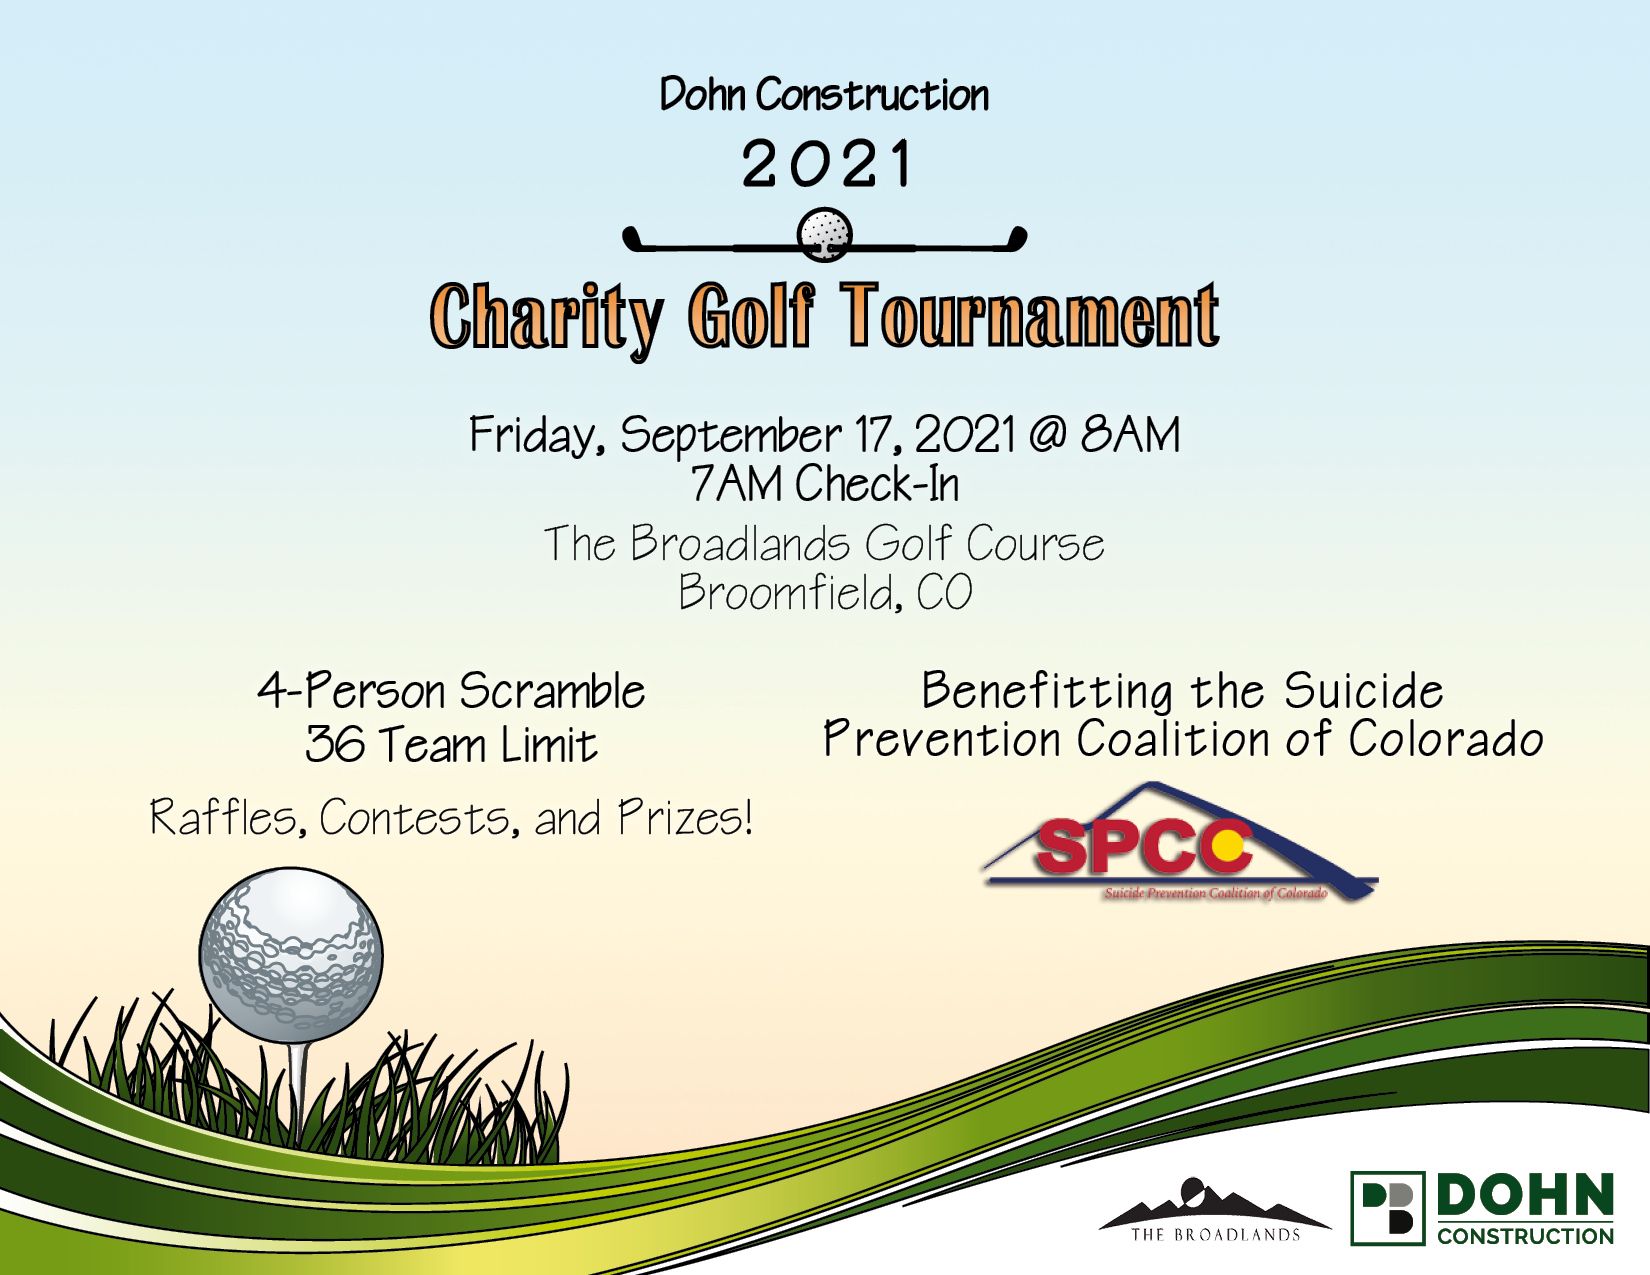 Save the date for the Dohn Construction Charity Golf Tournament benefitting the Suicide Prevention Coalition of Colorado.